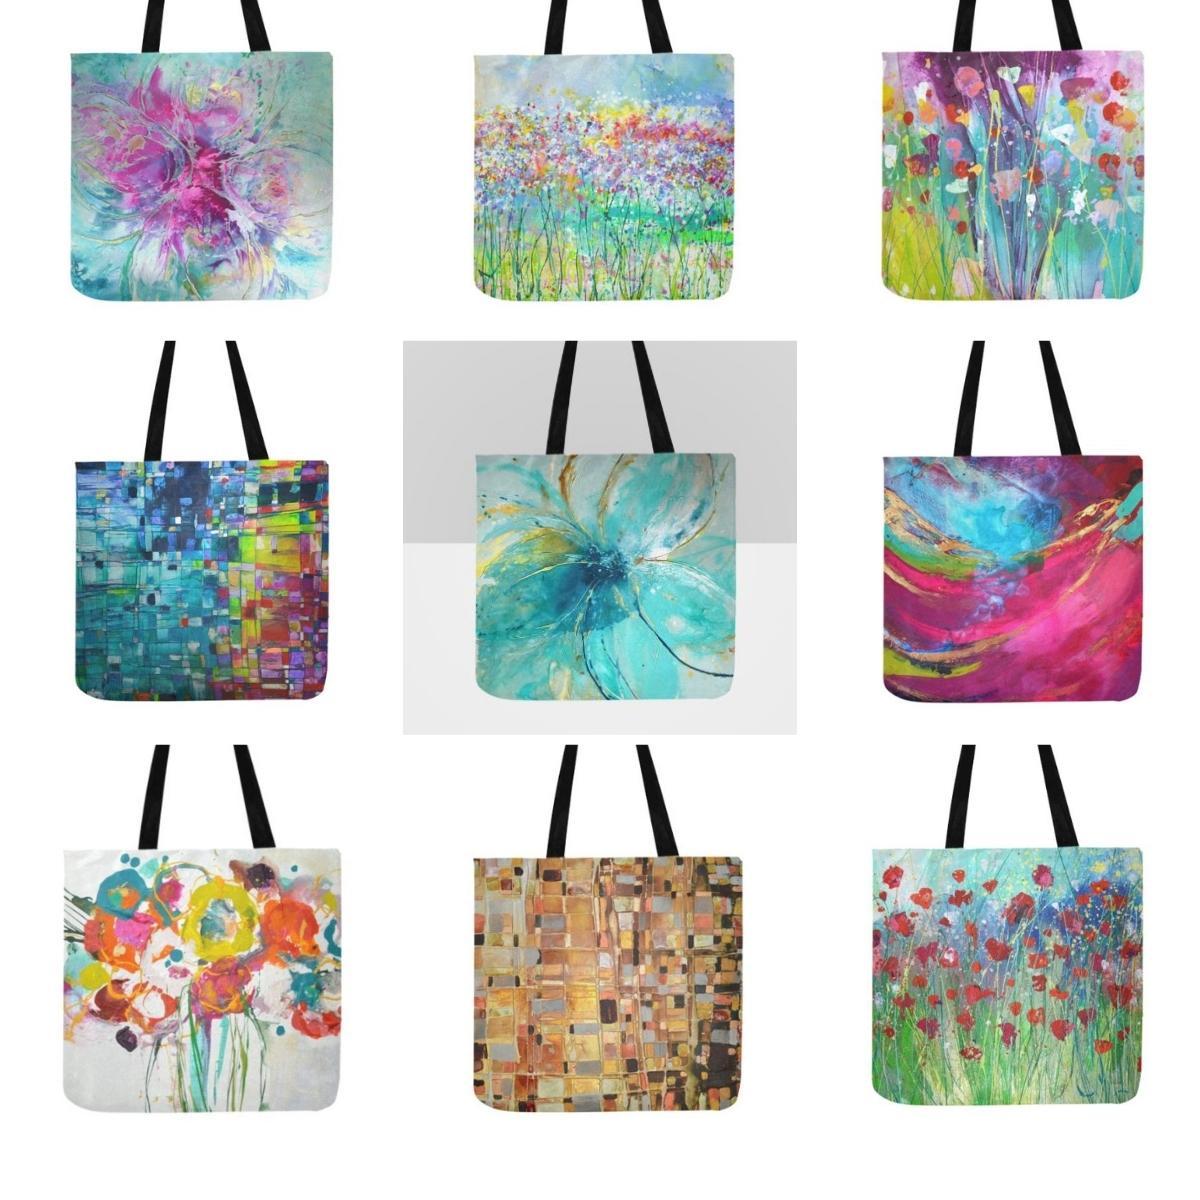 Bag painting ideas: 17 tote bag painting ideas & canvas bag